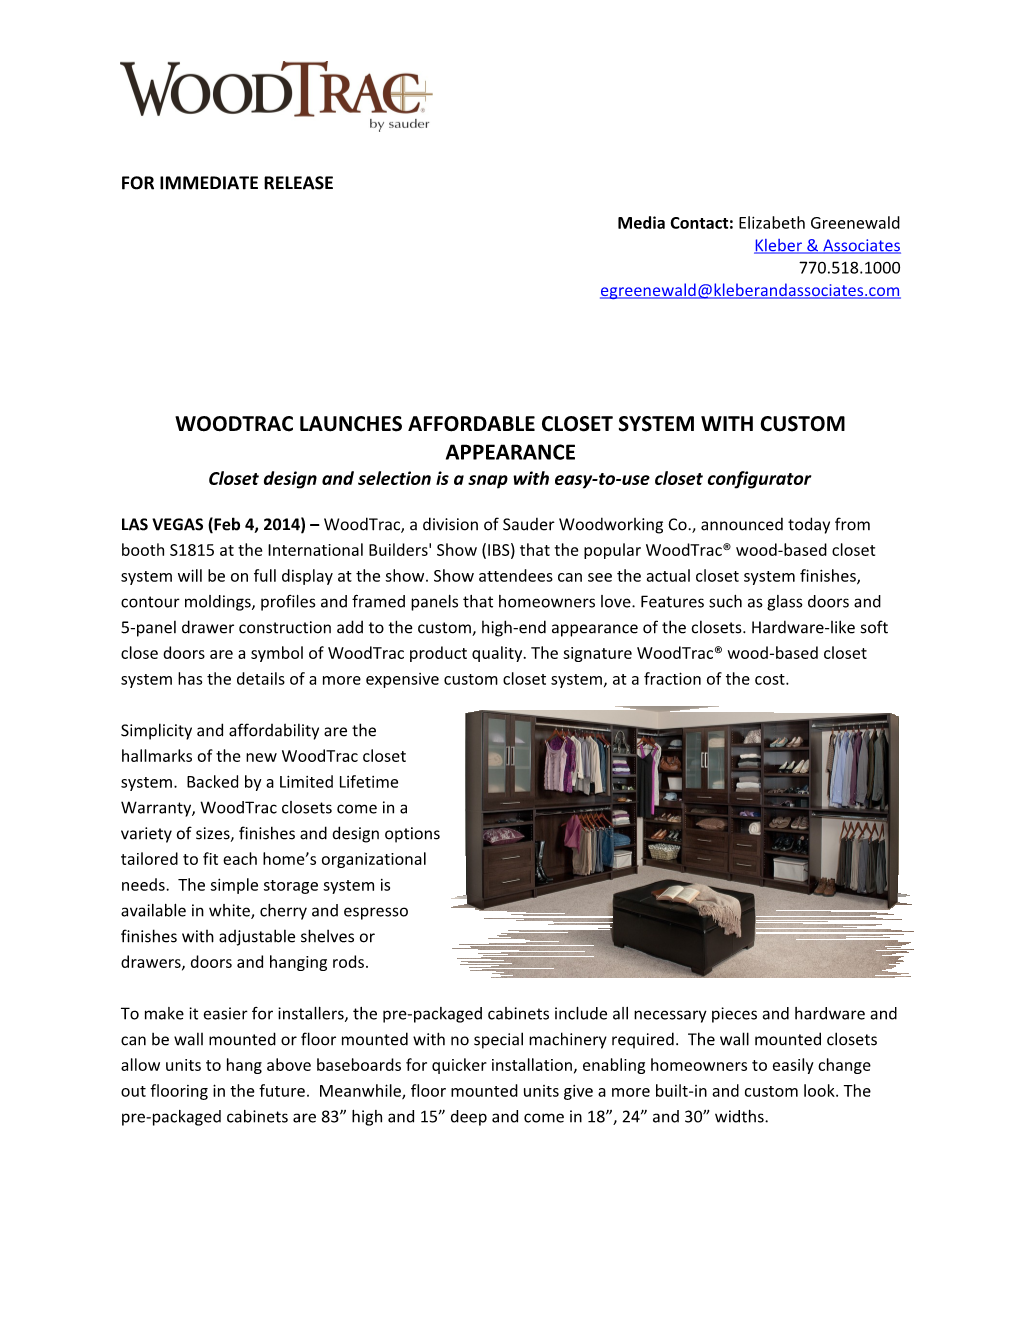 Woodtrac Launches Affordable Closet System with Custom Appearance